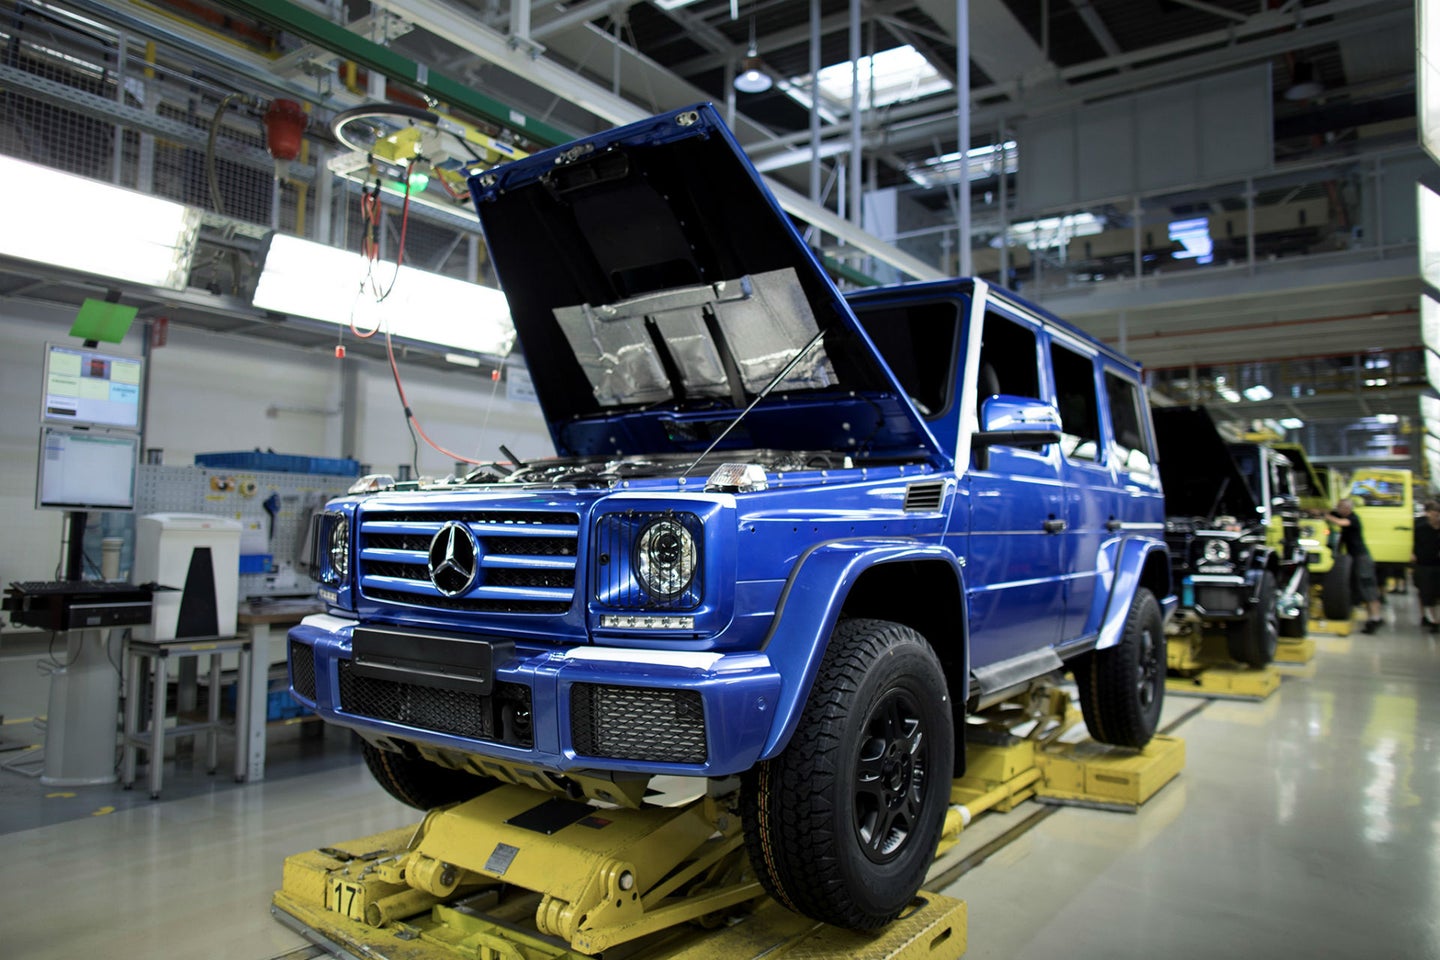 The 300,000th Mercedes-Benz G-Wagen Just Rolled Off the Production Line